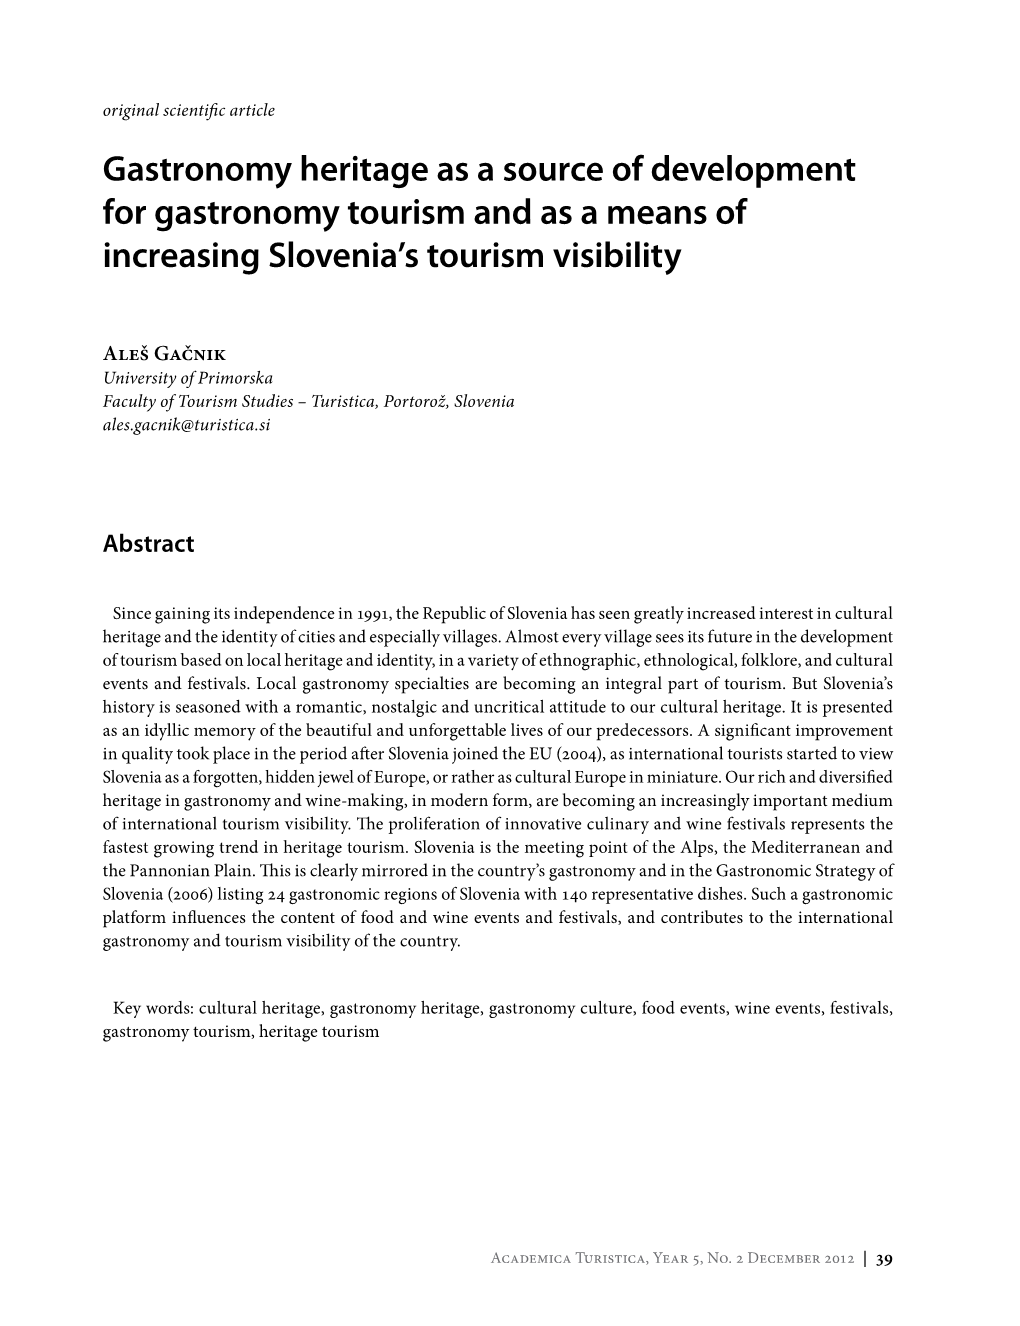 Gastronomy Heritage As a Source of Development for Gastronomy Tourism and As a Means of Increasing Slovenia’S Tourism Visibility